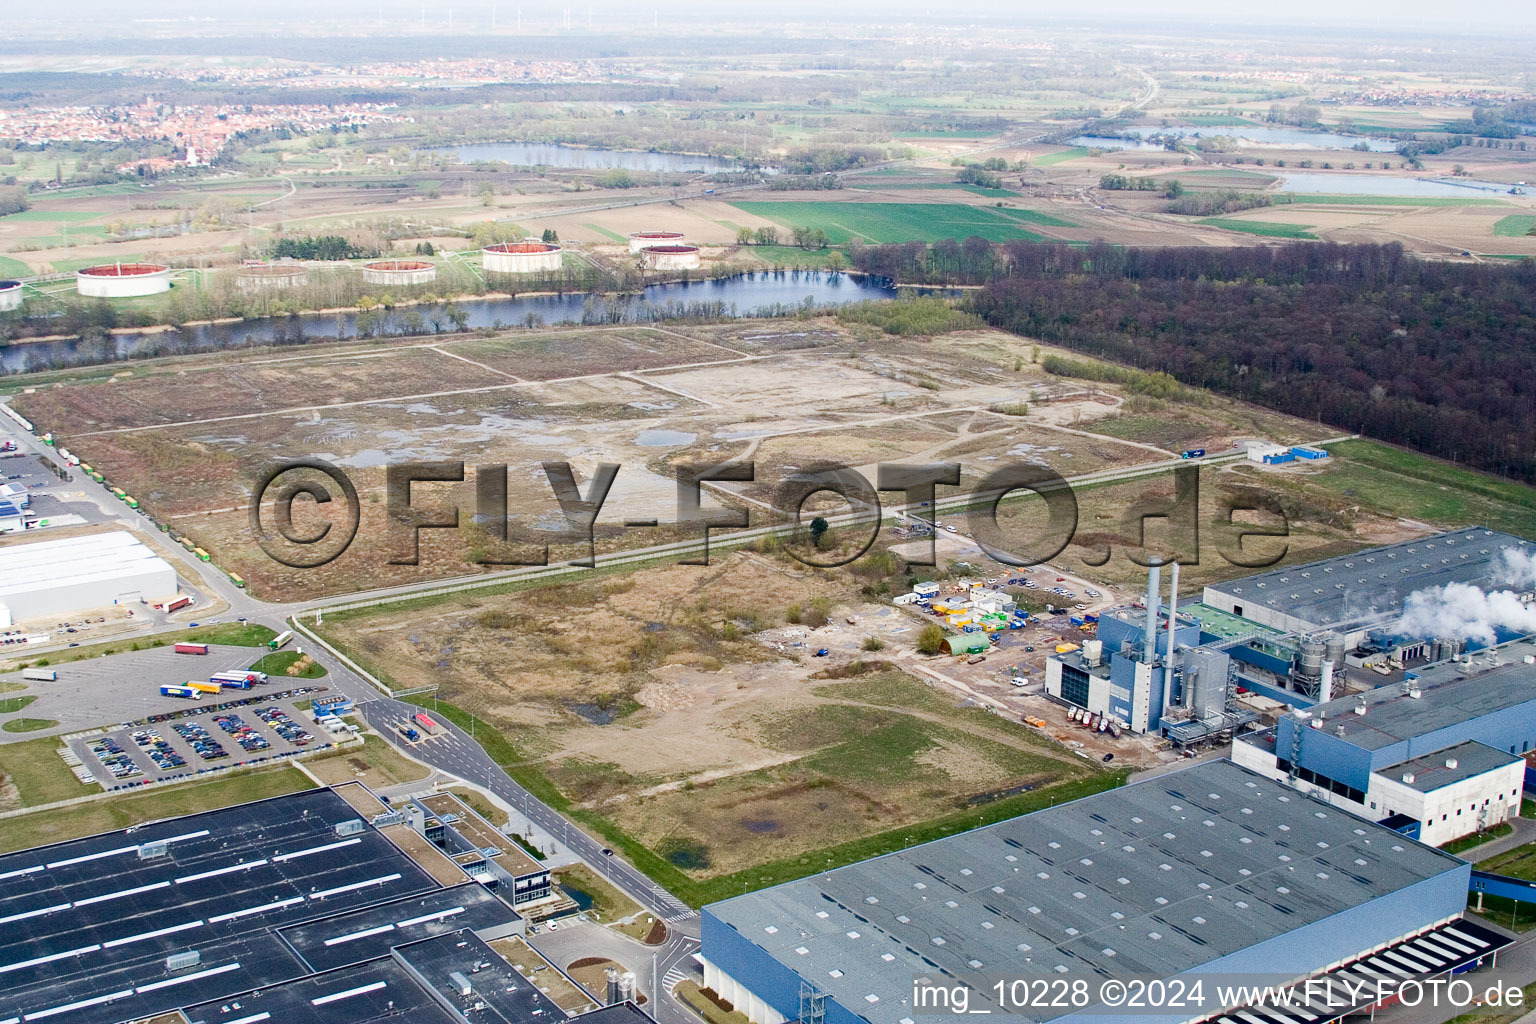 Site for the Netto logistics center in the industrial area behind the Palm paper factory in Wörth am Rhein in the state Rhineland-Palatinate, Germany